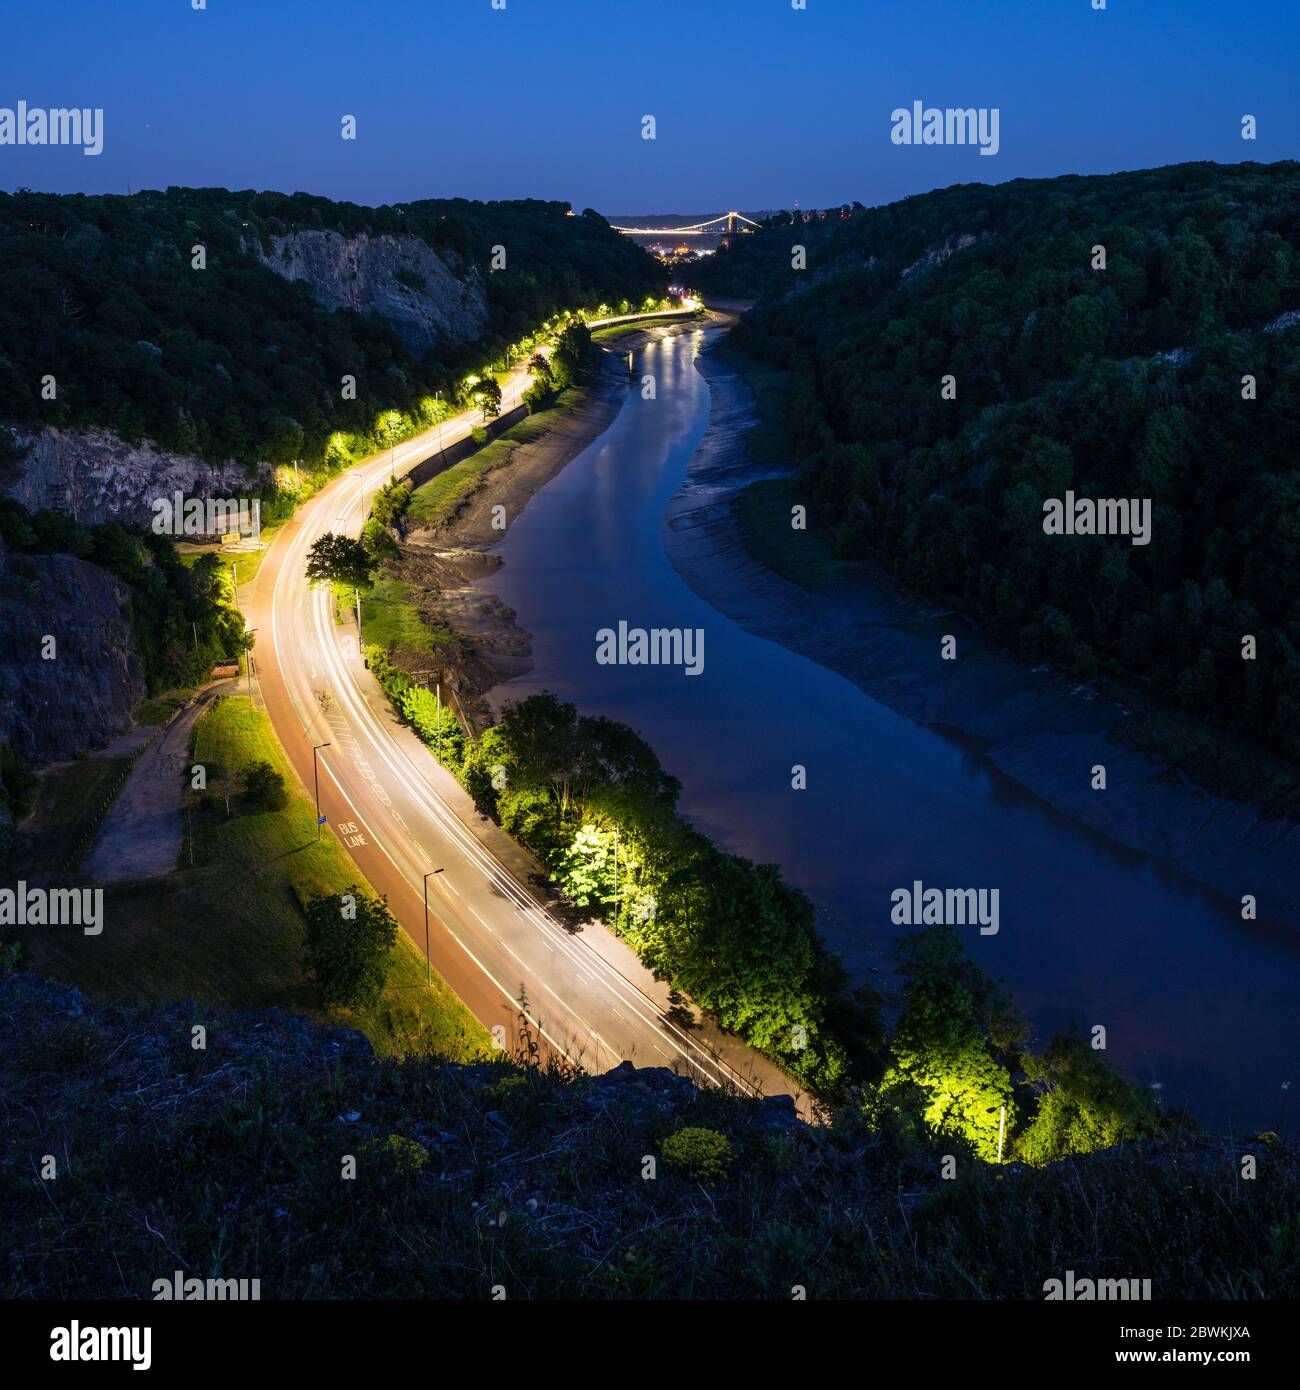 The A4 Portway road is lit at dusk in the Avon Gorge below Bristol's Clifton Suspension Bridge. Stock Photo